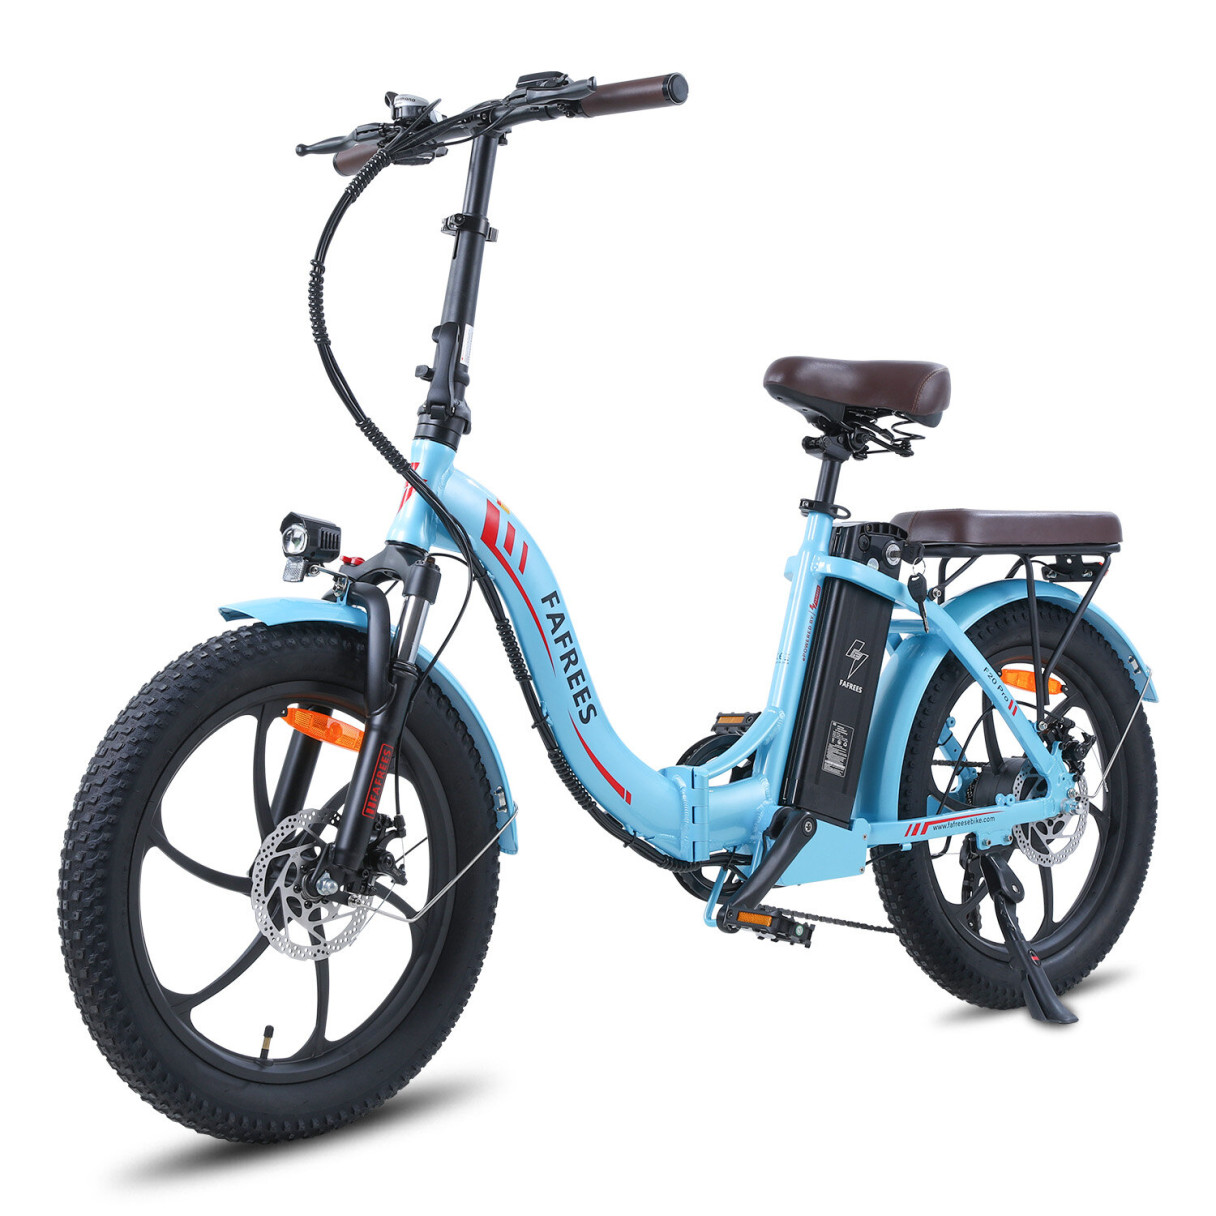 [EU DIRECT] FAFREES F20 PRO Electric Bike 36V 18AH Battery 250W Motor 20x3.0inch Tires 25KM/H Top Speed 120-150KM Max Mileage 150KG Max Load Folding Electric Bicycle